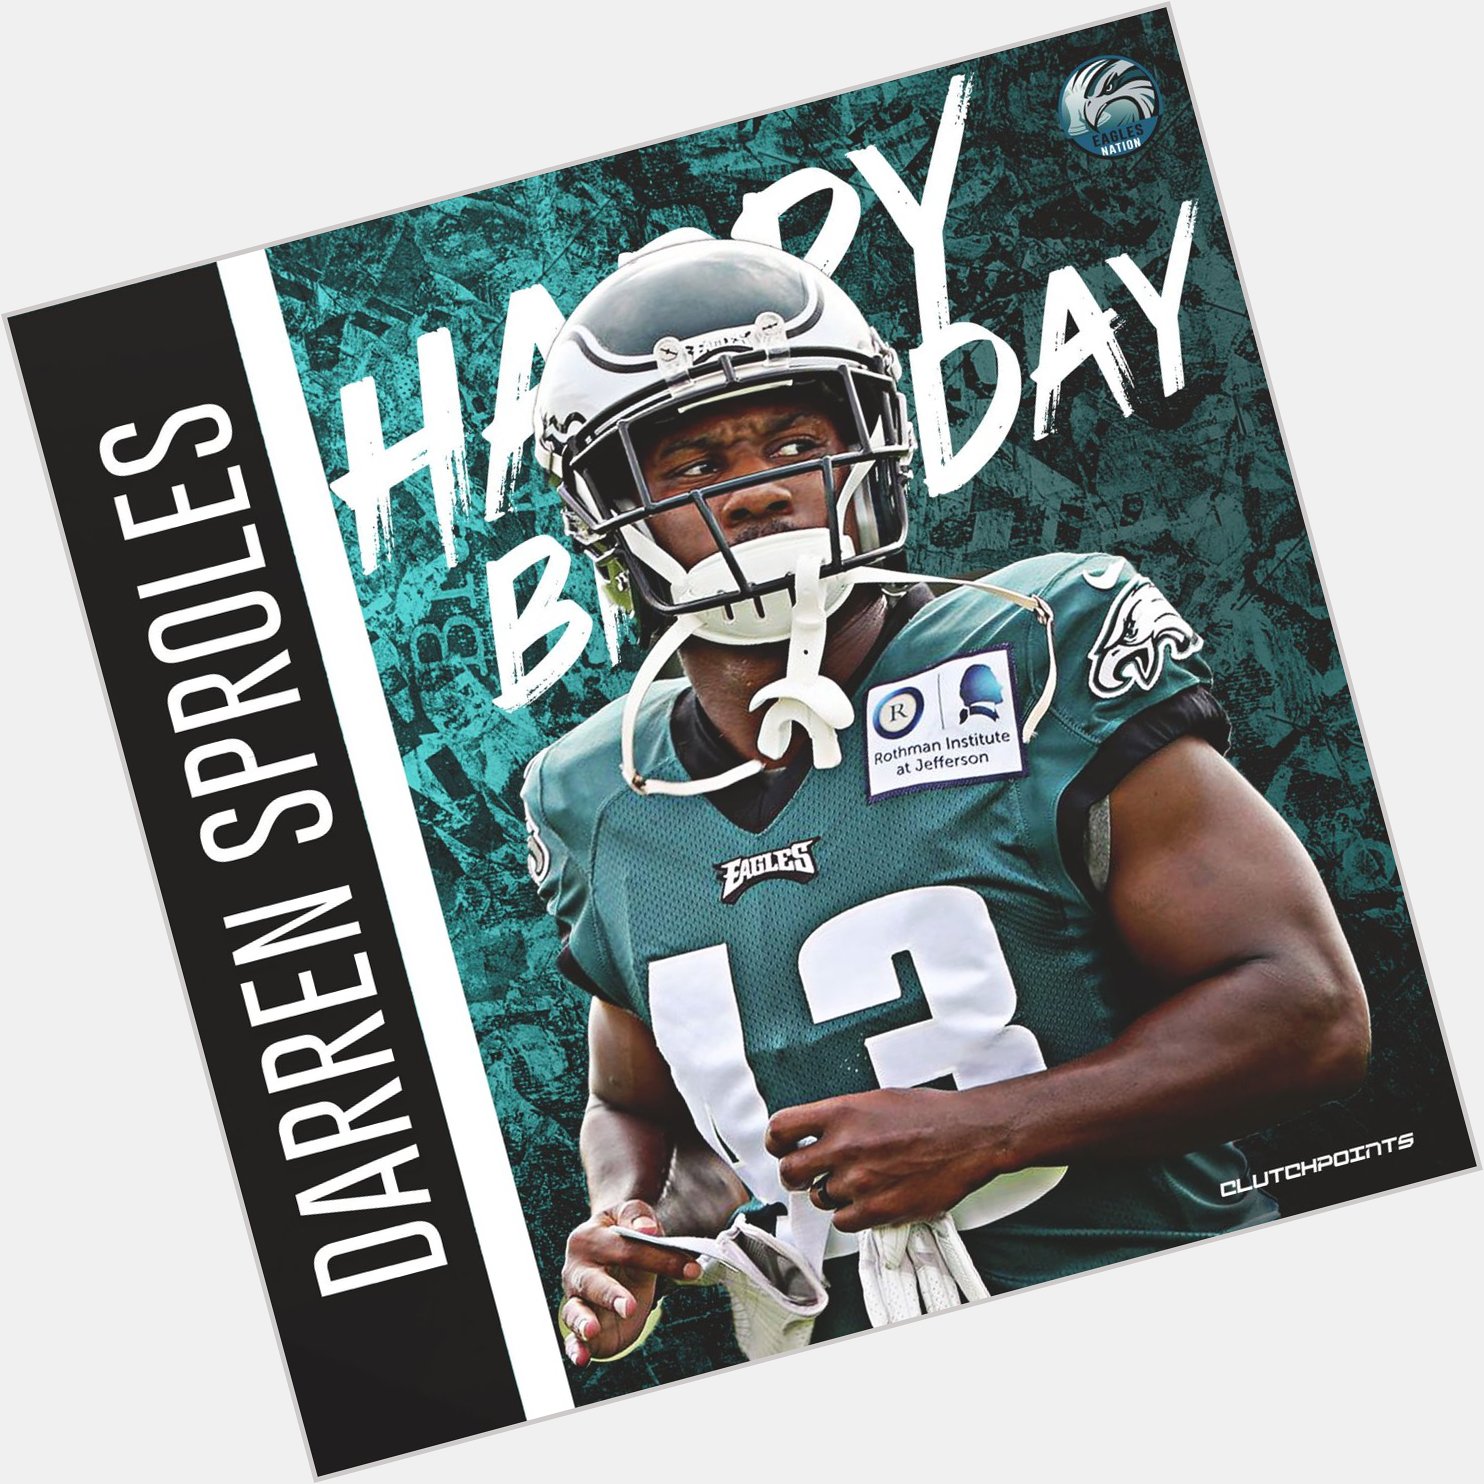 Let\s wish 3x Pro Bowler and Super Bowl champ Darren Sproles a happy 38th birthday! 